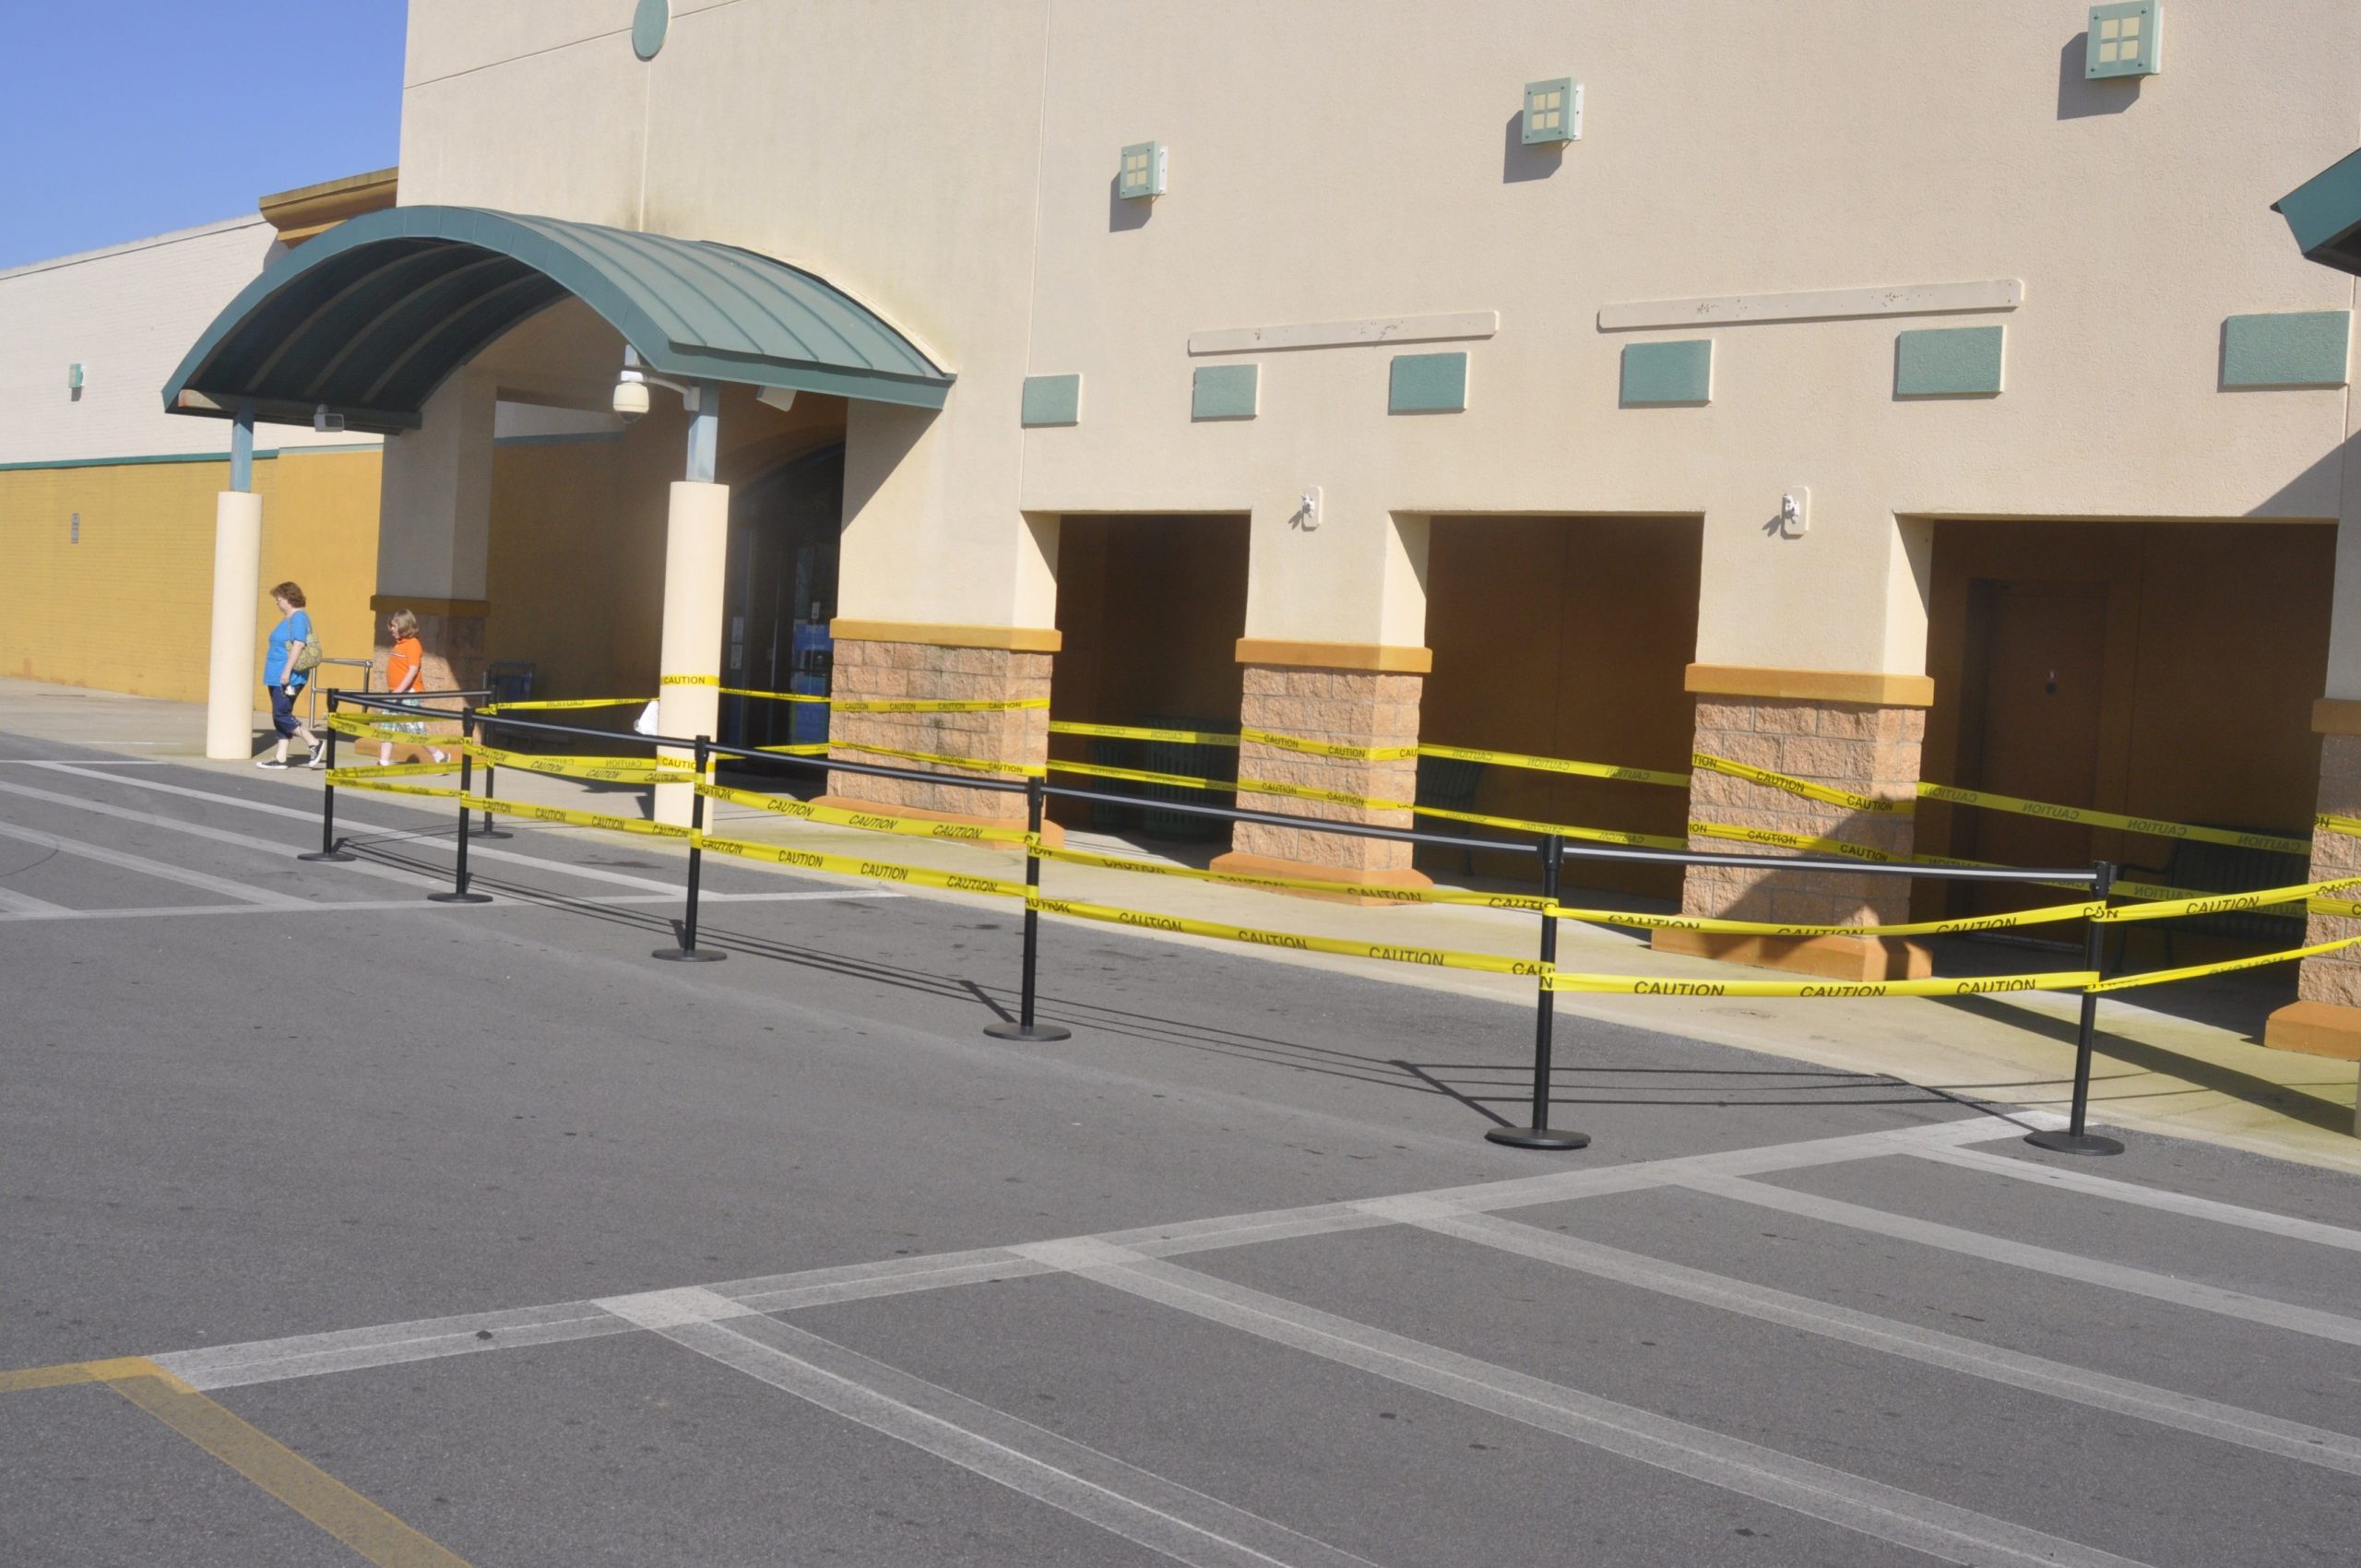 A portion of the Beall’s Department Store in Milton has a caution tape barrier set up near the entrance to keep residents safe.